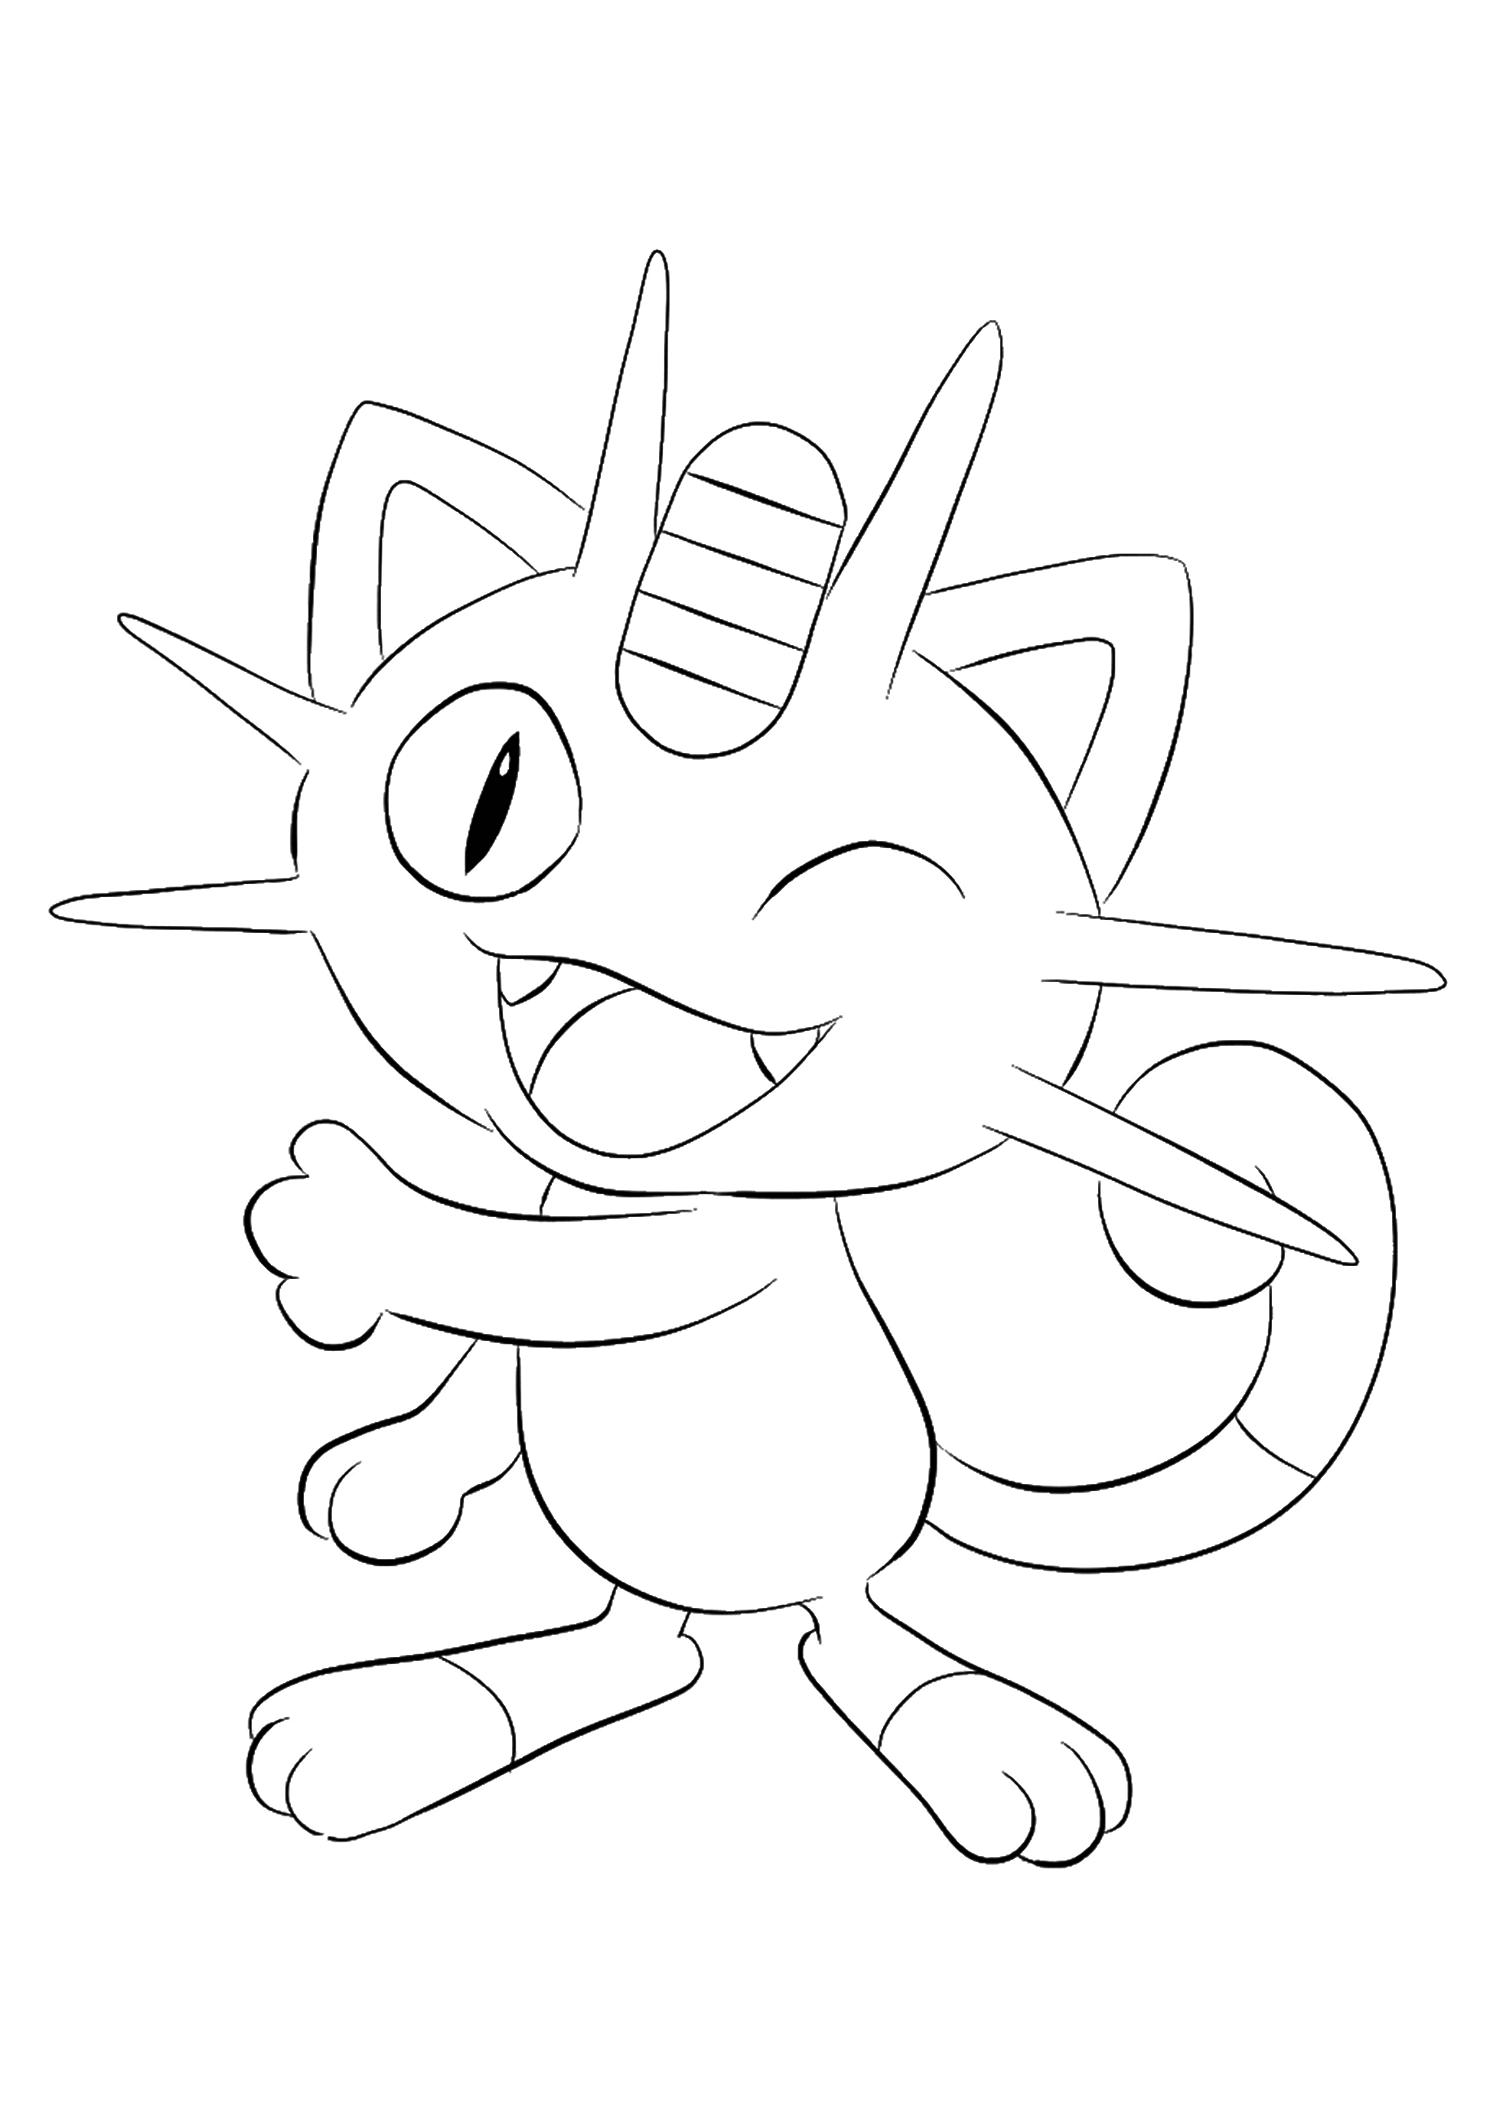 Meowth (No.52). Meowth Coloring page, Generation I Pokemon of type DarkOriginal image credit: Pokemon linearts by Lilly Gerbil'font-size:smaller;color:gray'>Permission: All rights reserved © Pokemon company and Ken Sugimori.